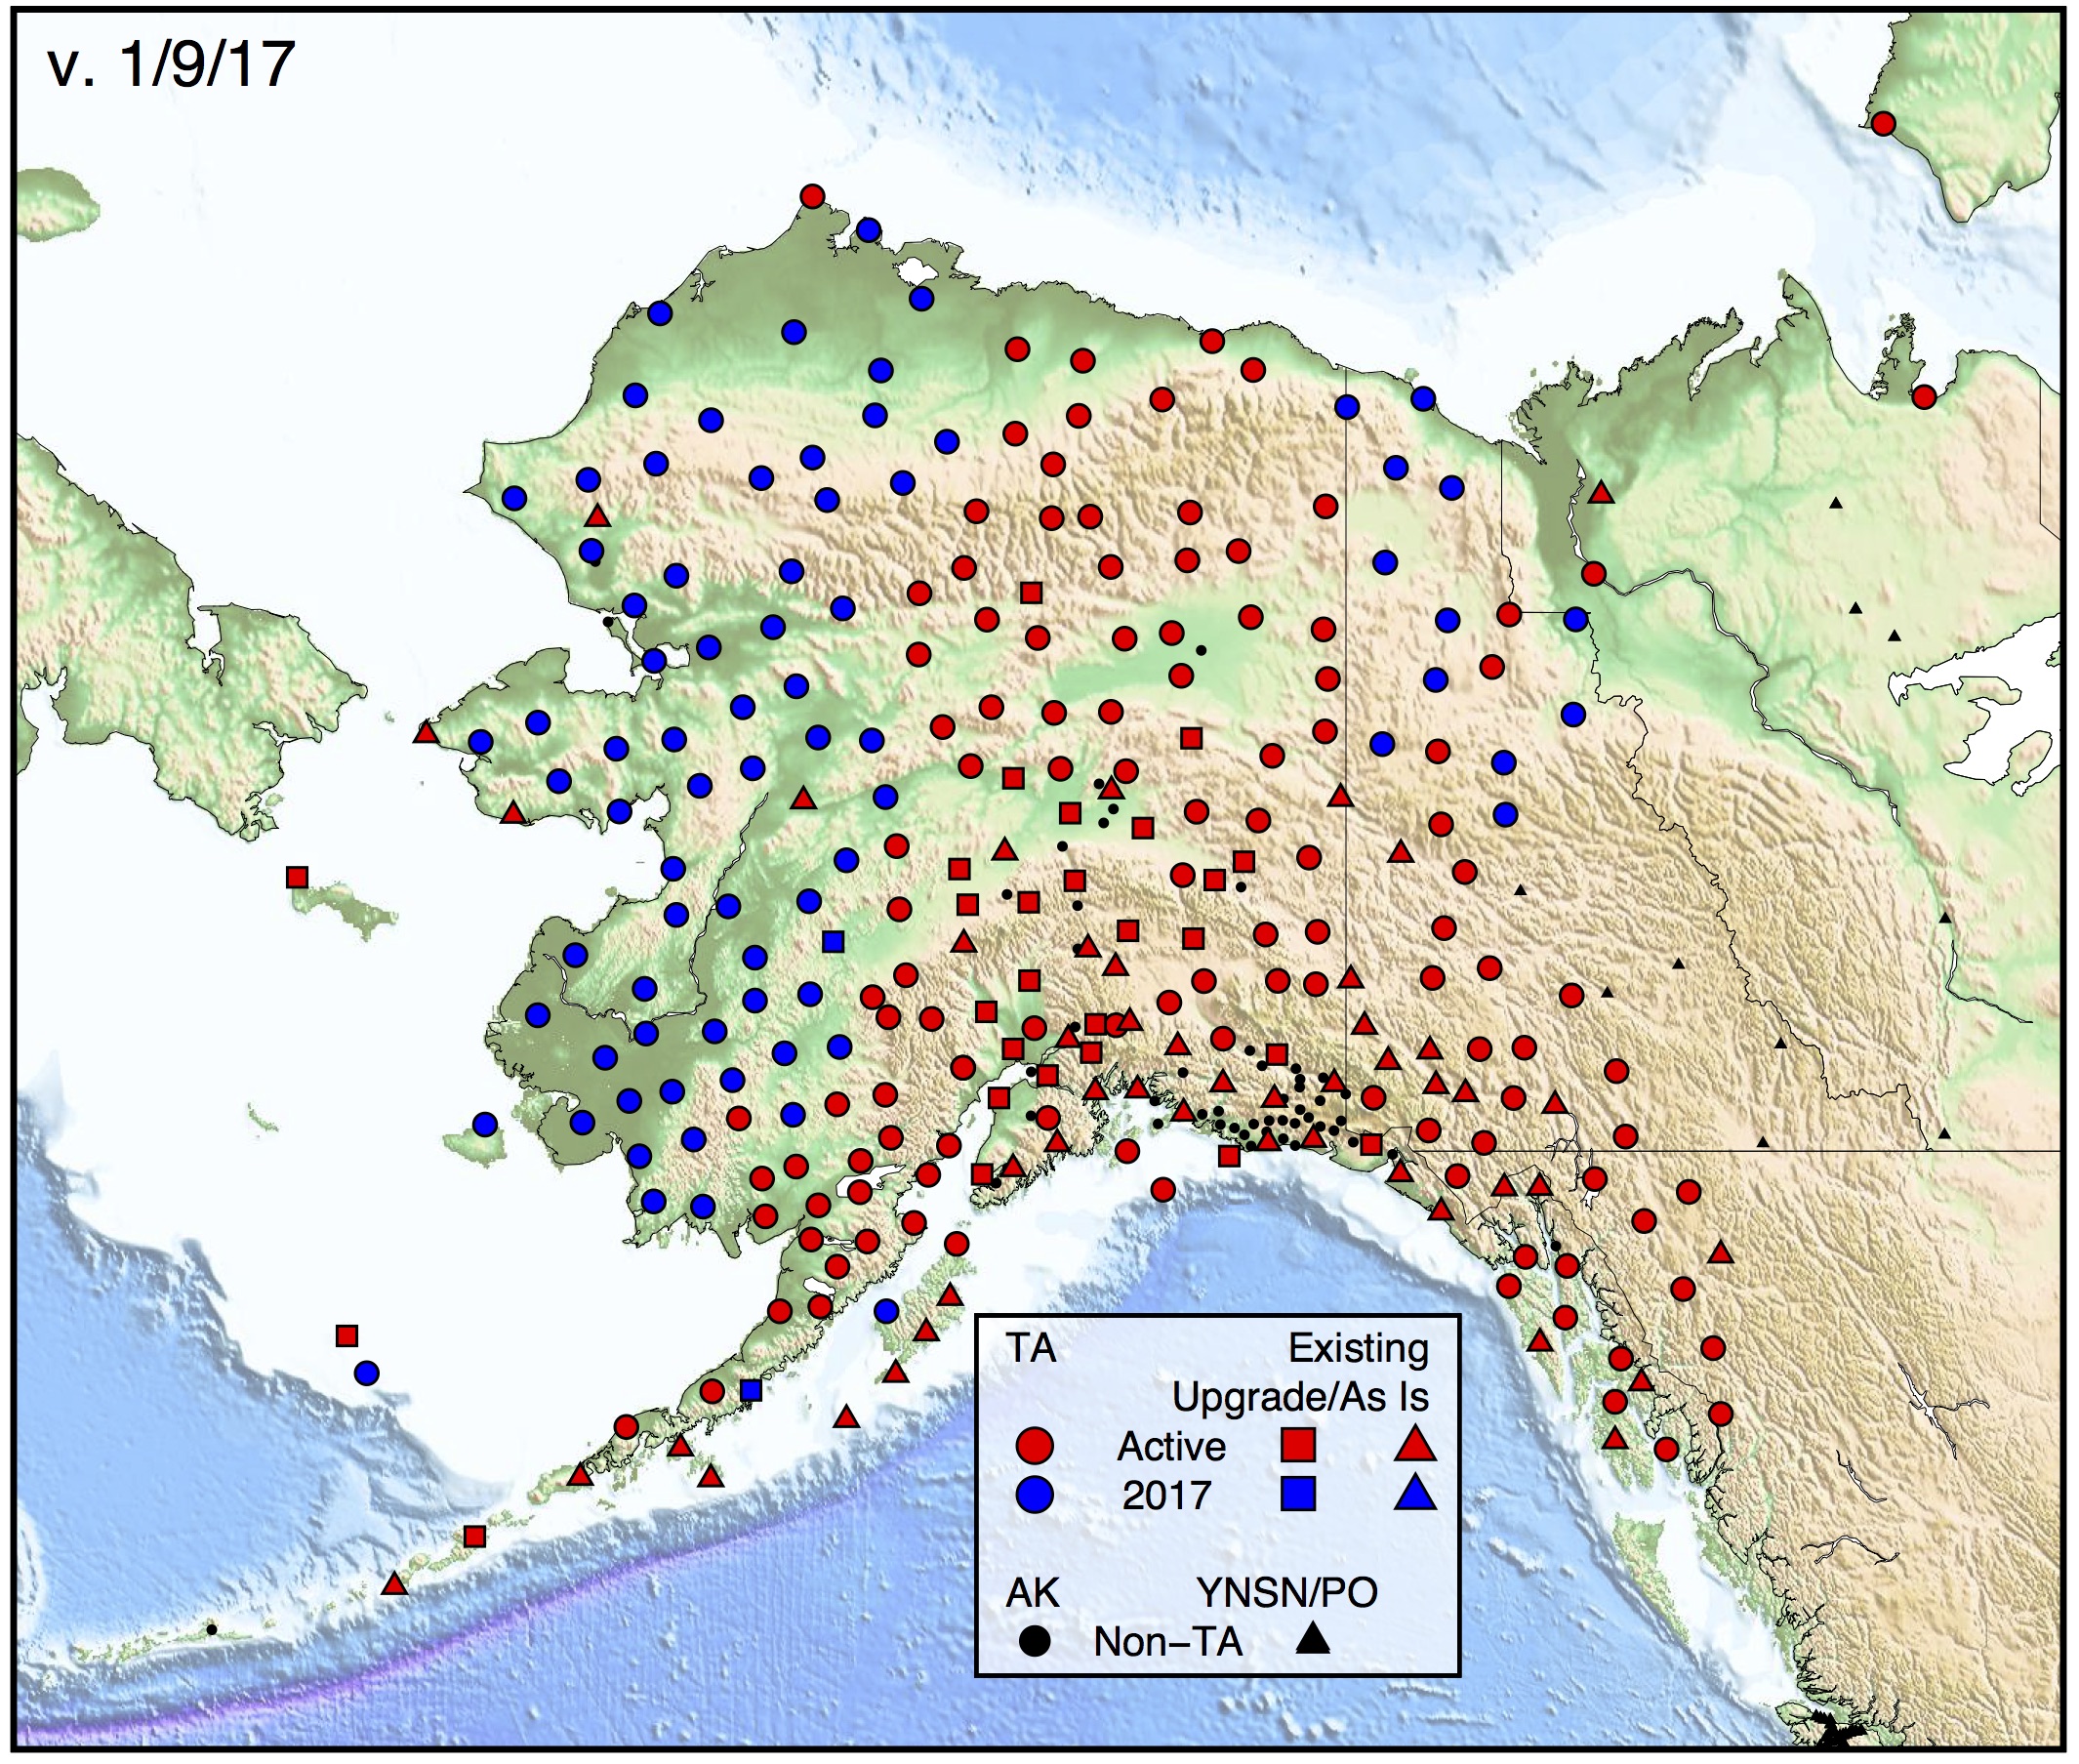 Planned TA Deployments by Year. "TA" sites (circles) are new seismic stations, and "Existing" sites are either upgraded (squares) or as-is (triangles) contributing seismic stations. For current map see www.usarray.org/Alaska Figure credit: Kasey Aderhold